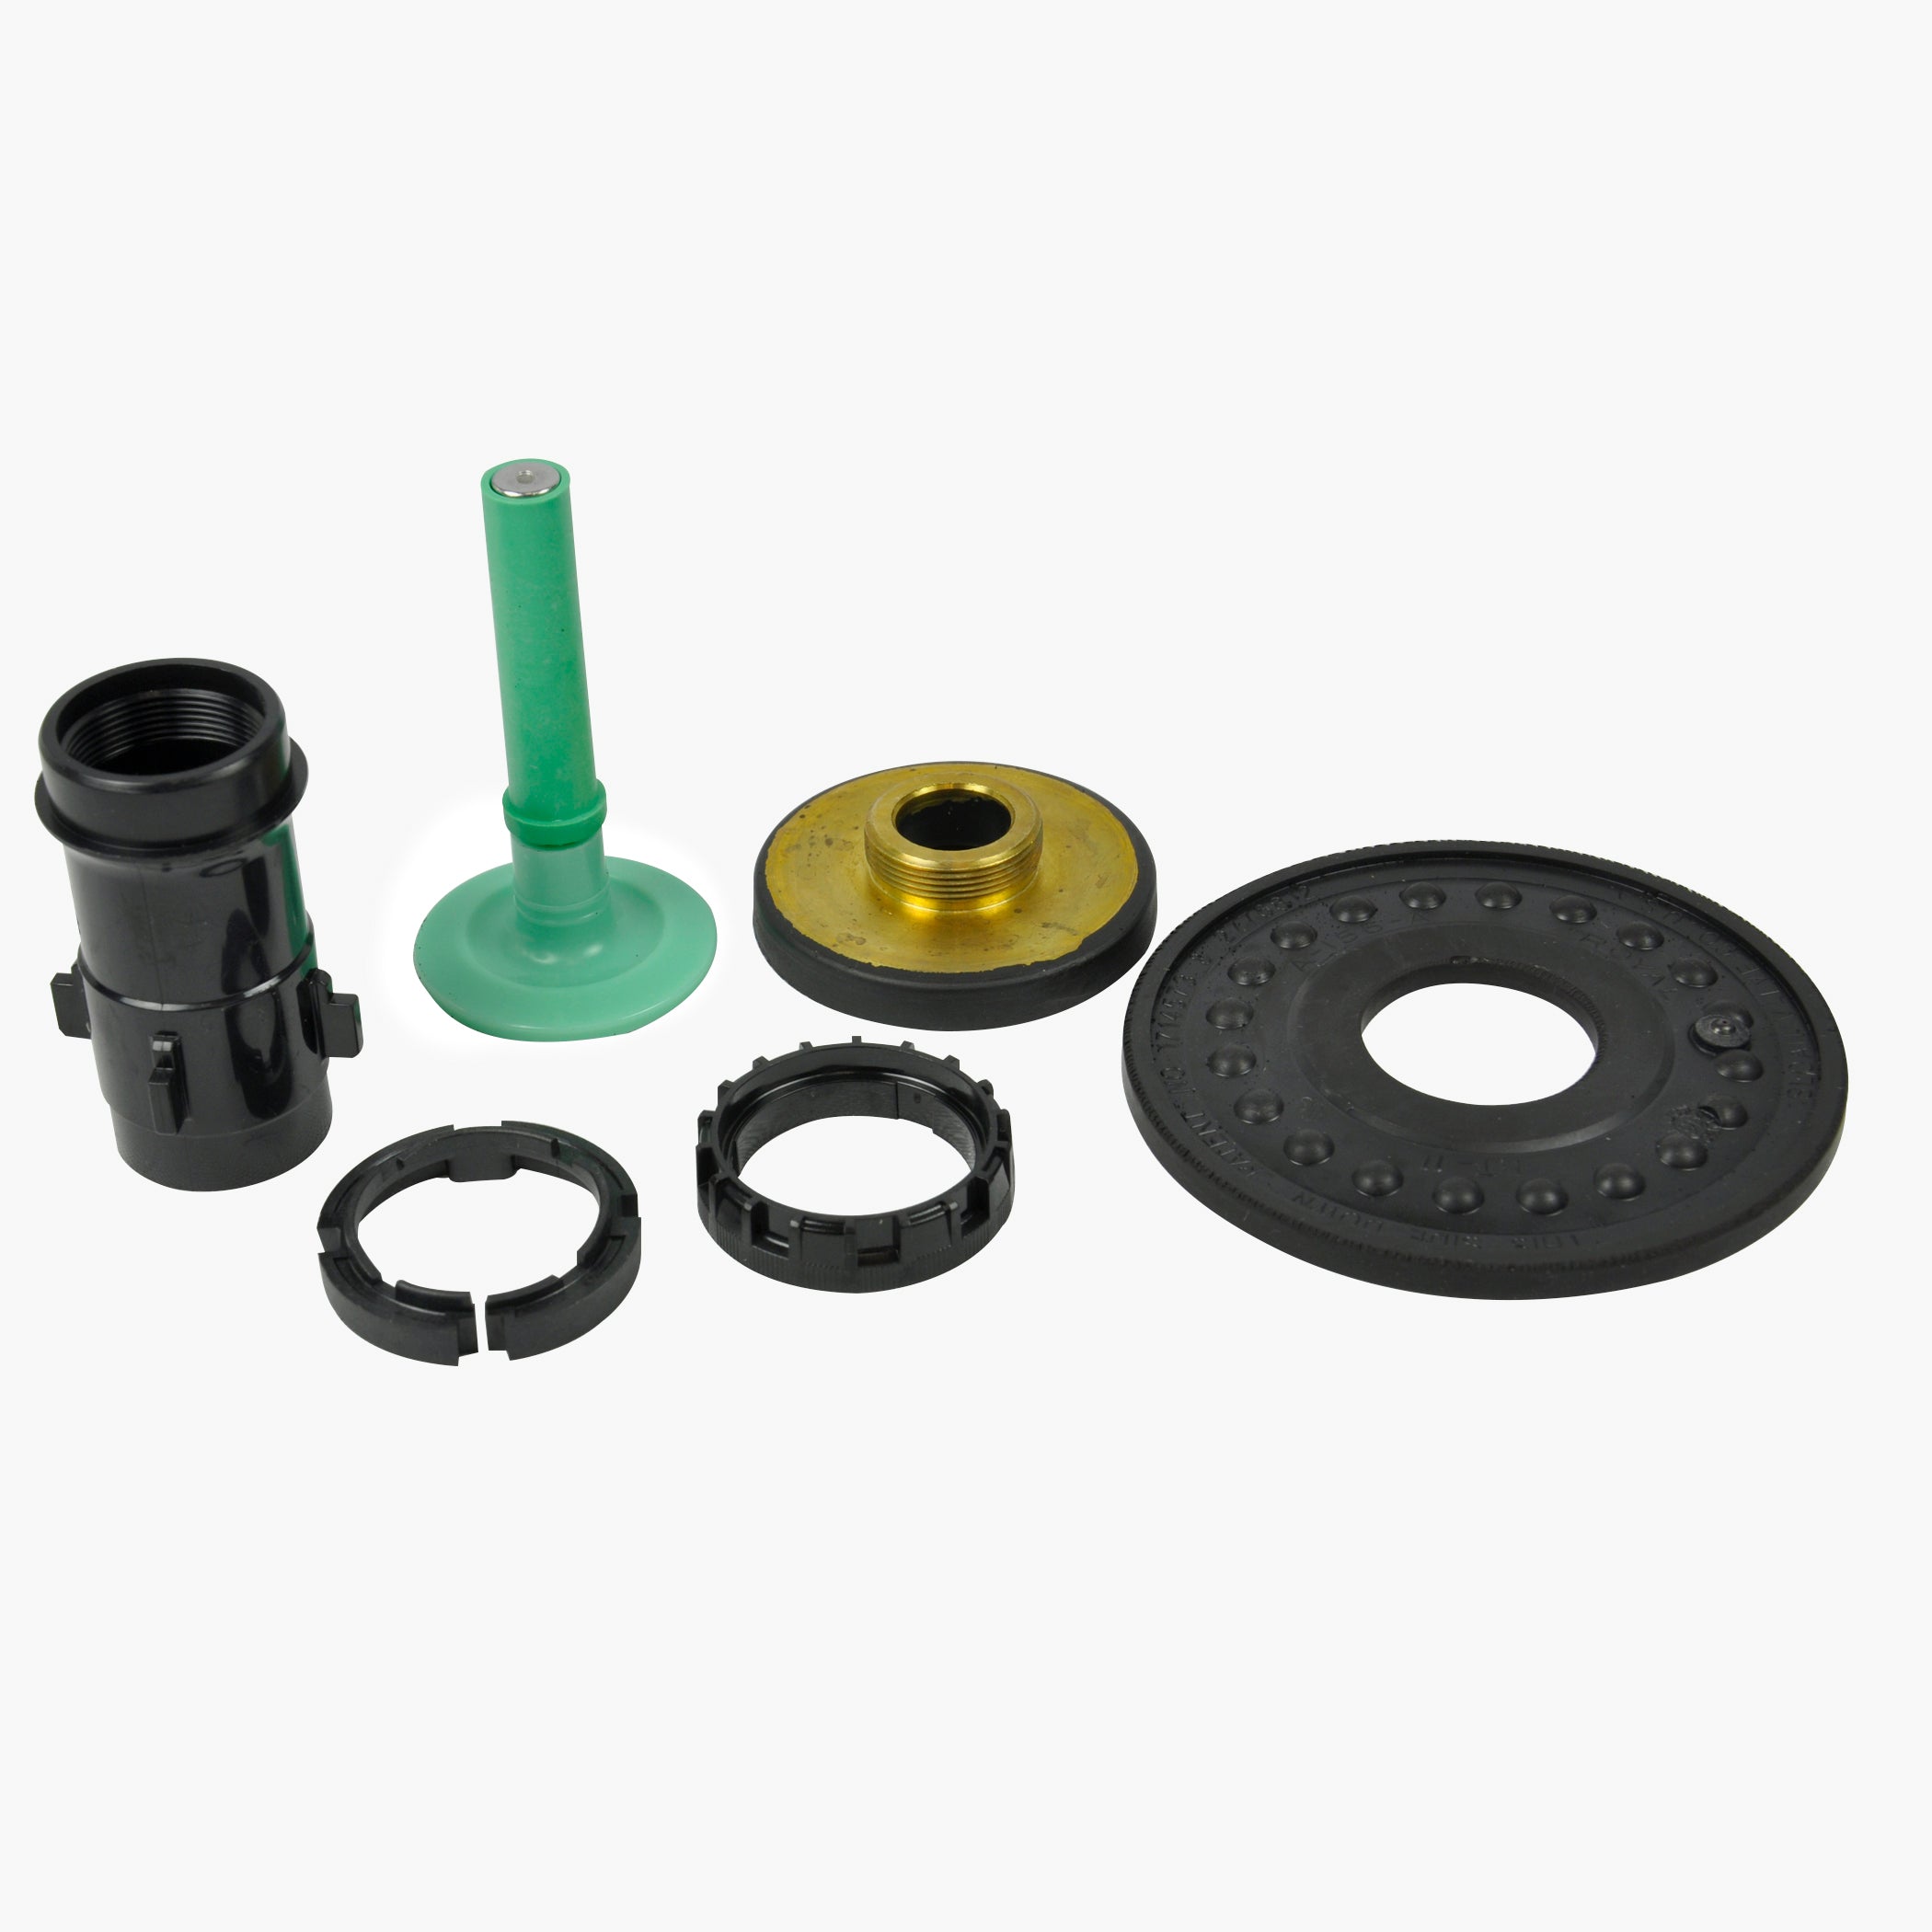 Danco 37081 Urinal Kit A-42-A 1.0GPM for Sloan